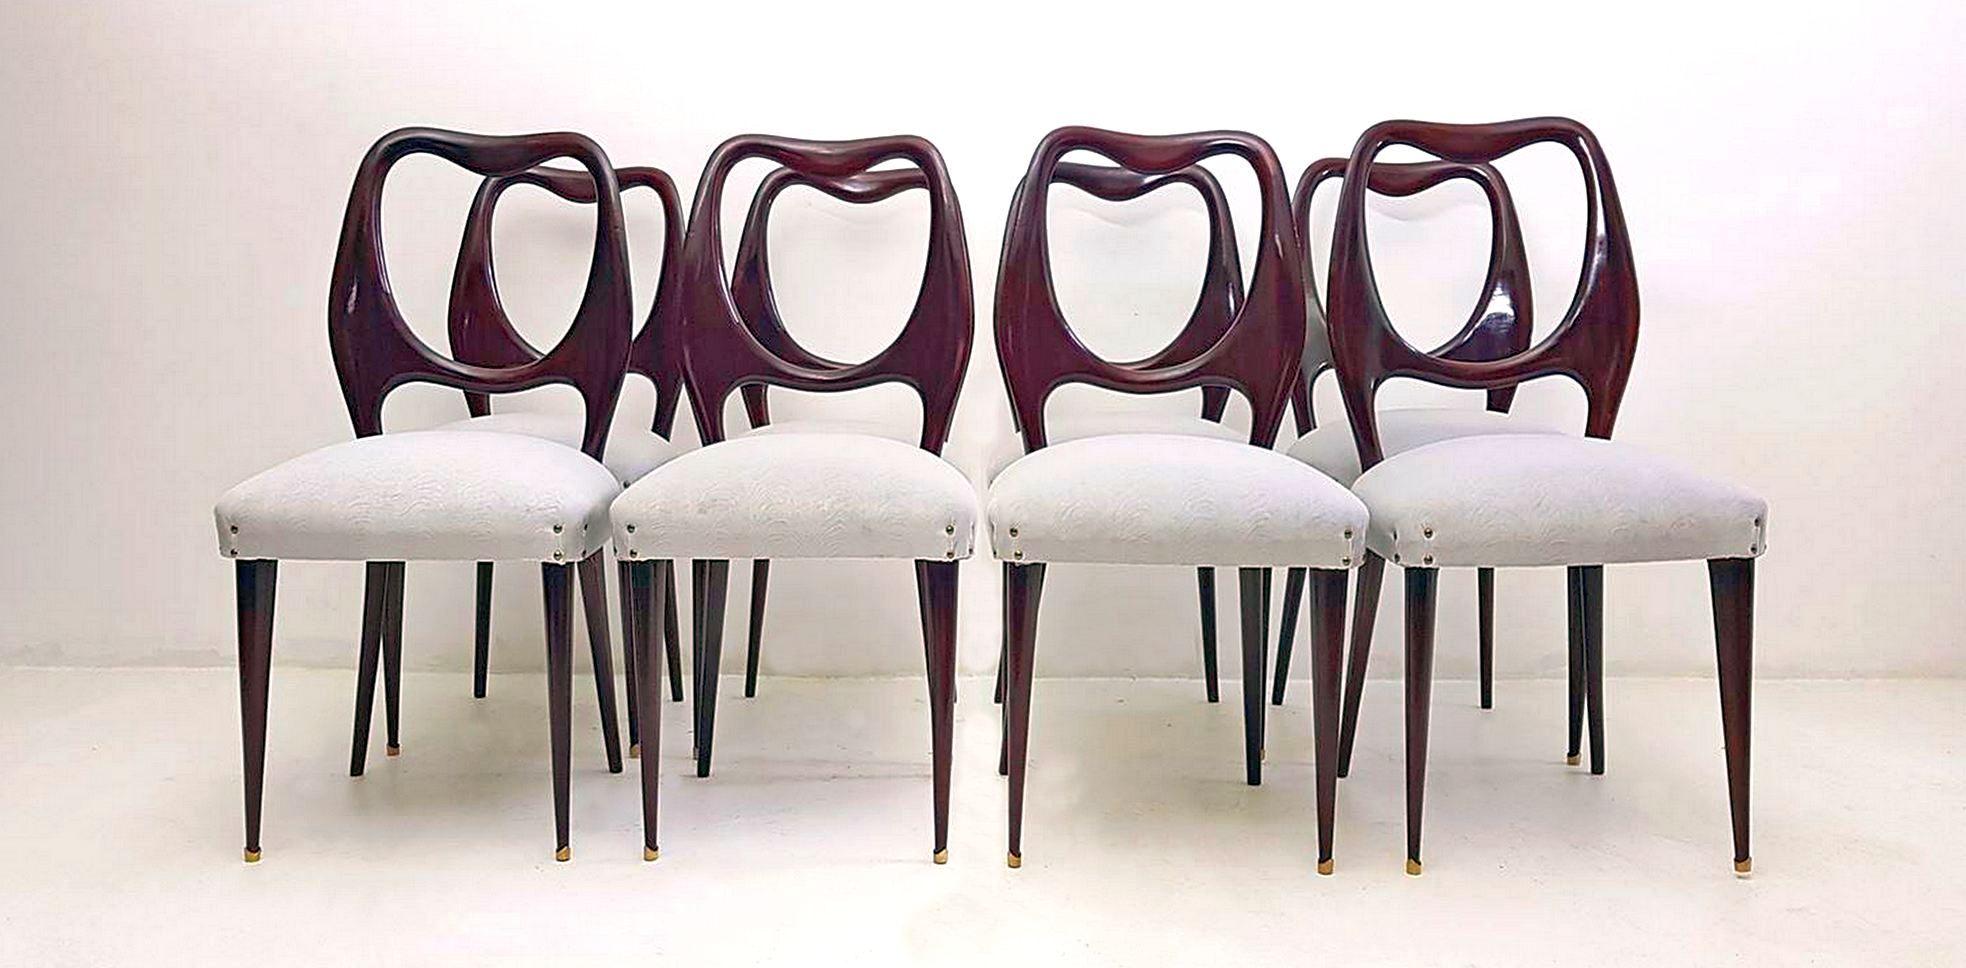 A set of eight Italian mahogany dining chairs with a superb organic design in mahogany by Vittorio Dassi. Professionally restored and reupholstered in a pale slightly patterned gray velvet. The chairs have supreme craftsmanship and are in excellent